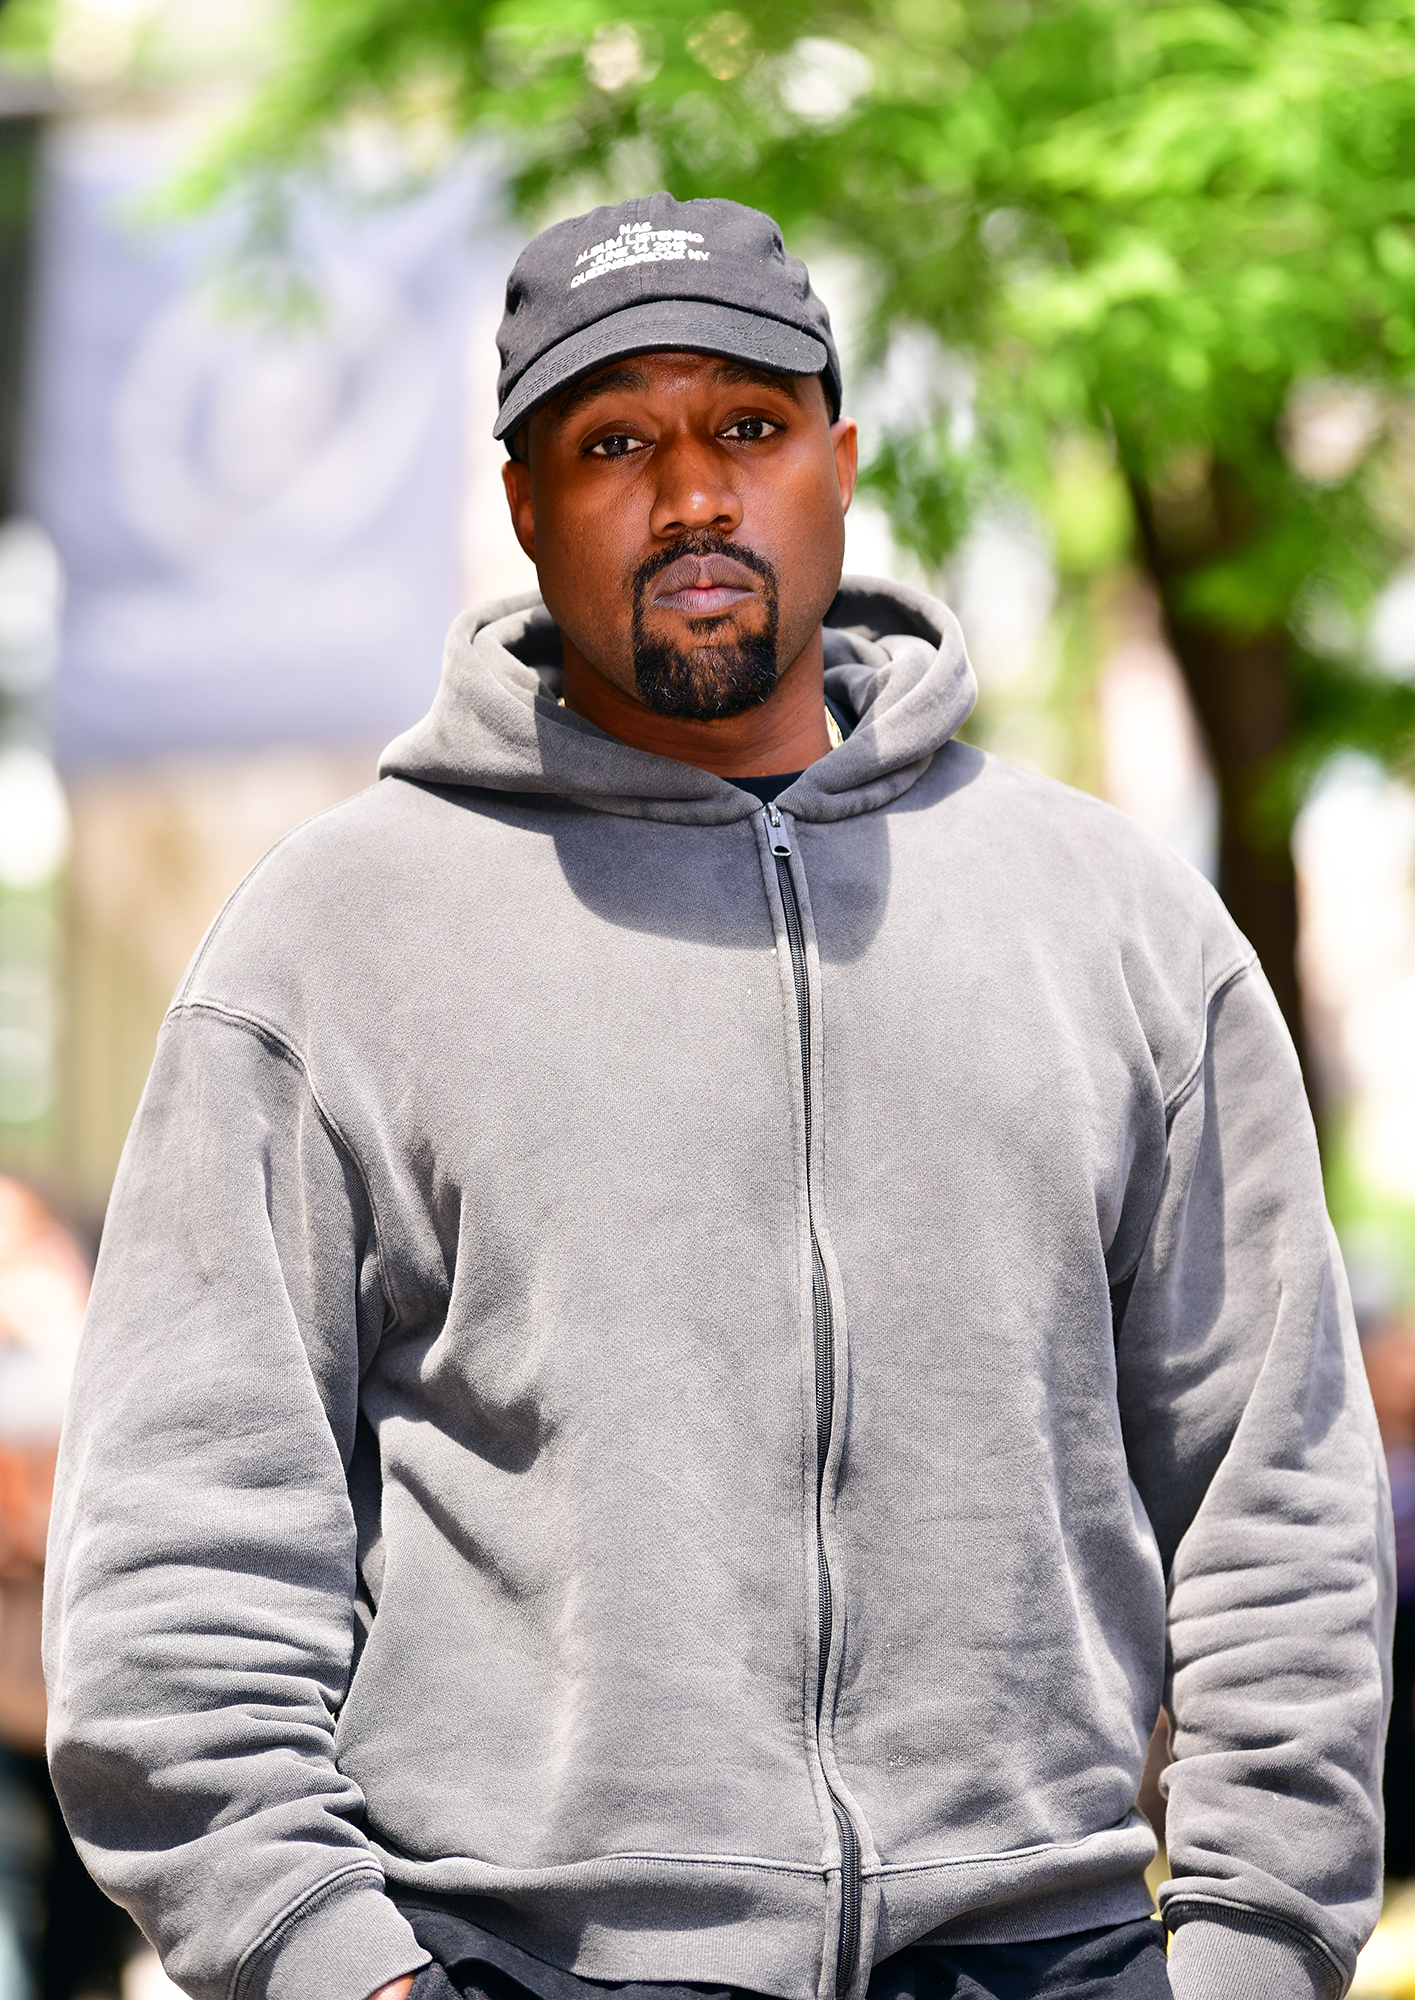 Chana School Xxx Hq Vedio - Kanye West: 'I Still Look at Pornhub' After Having Daughters